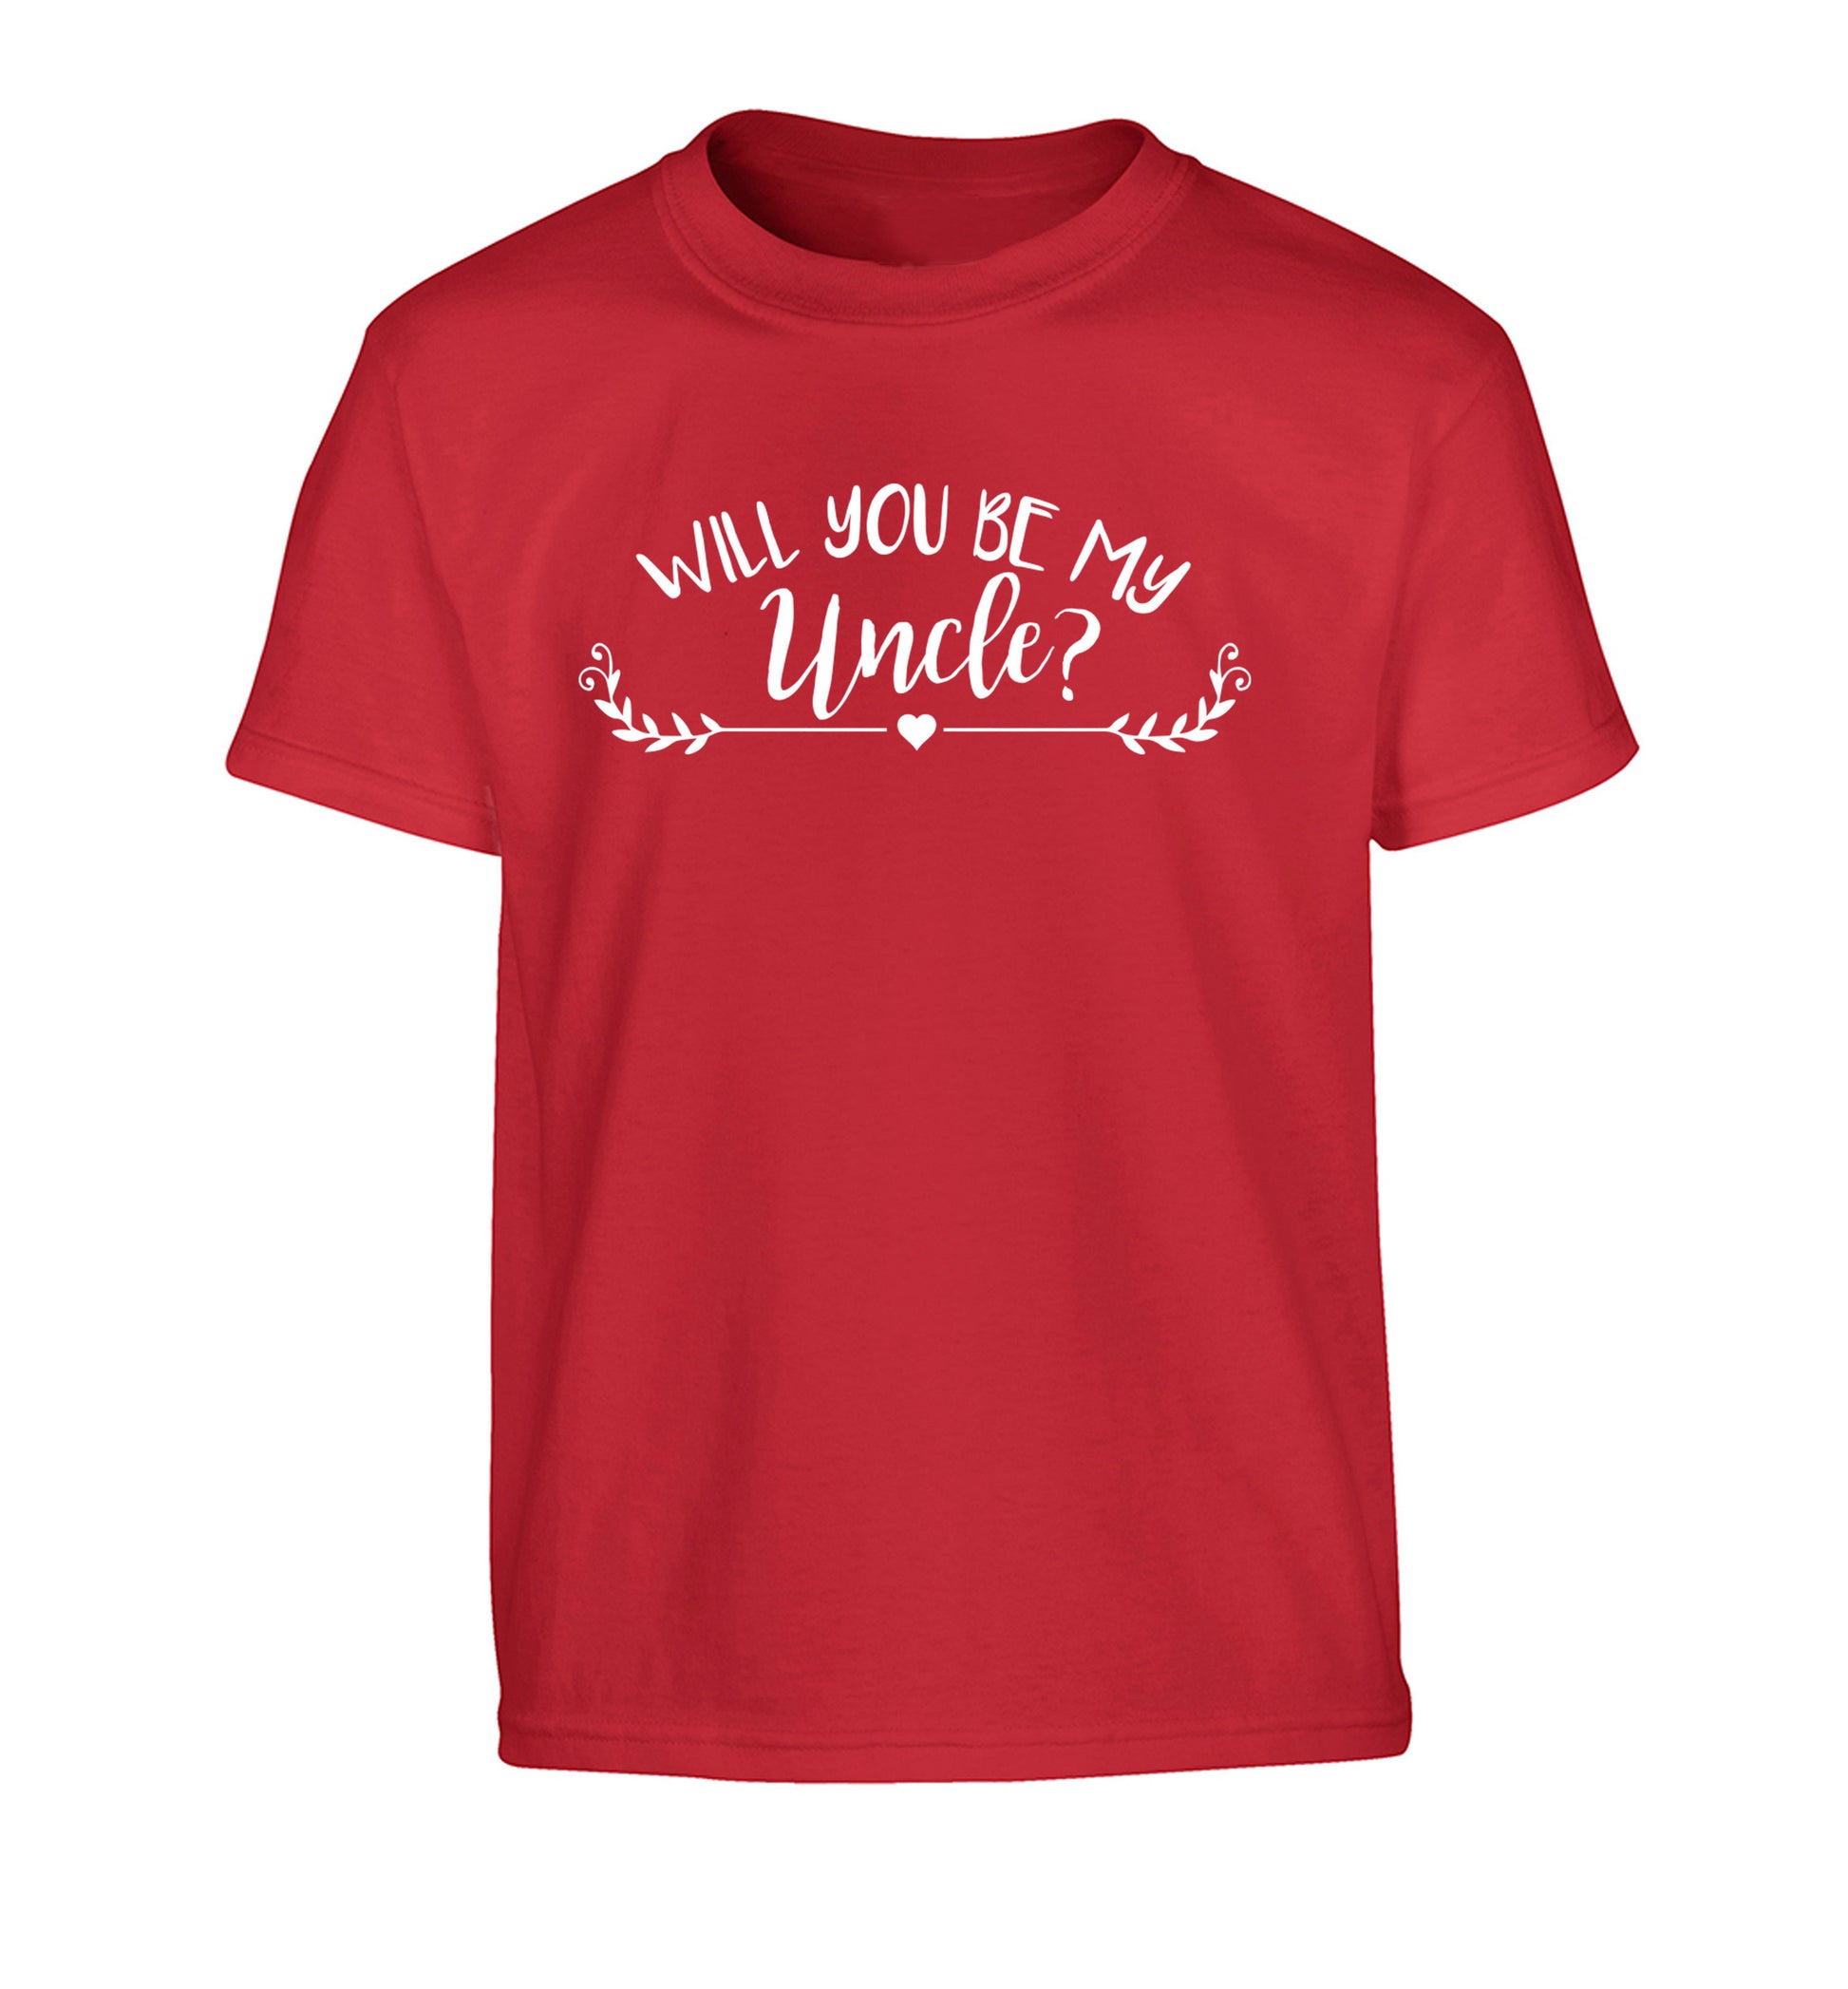 Will you be my uncle? Children's red Tshirt 12-14 Years